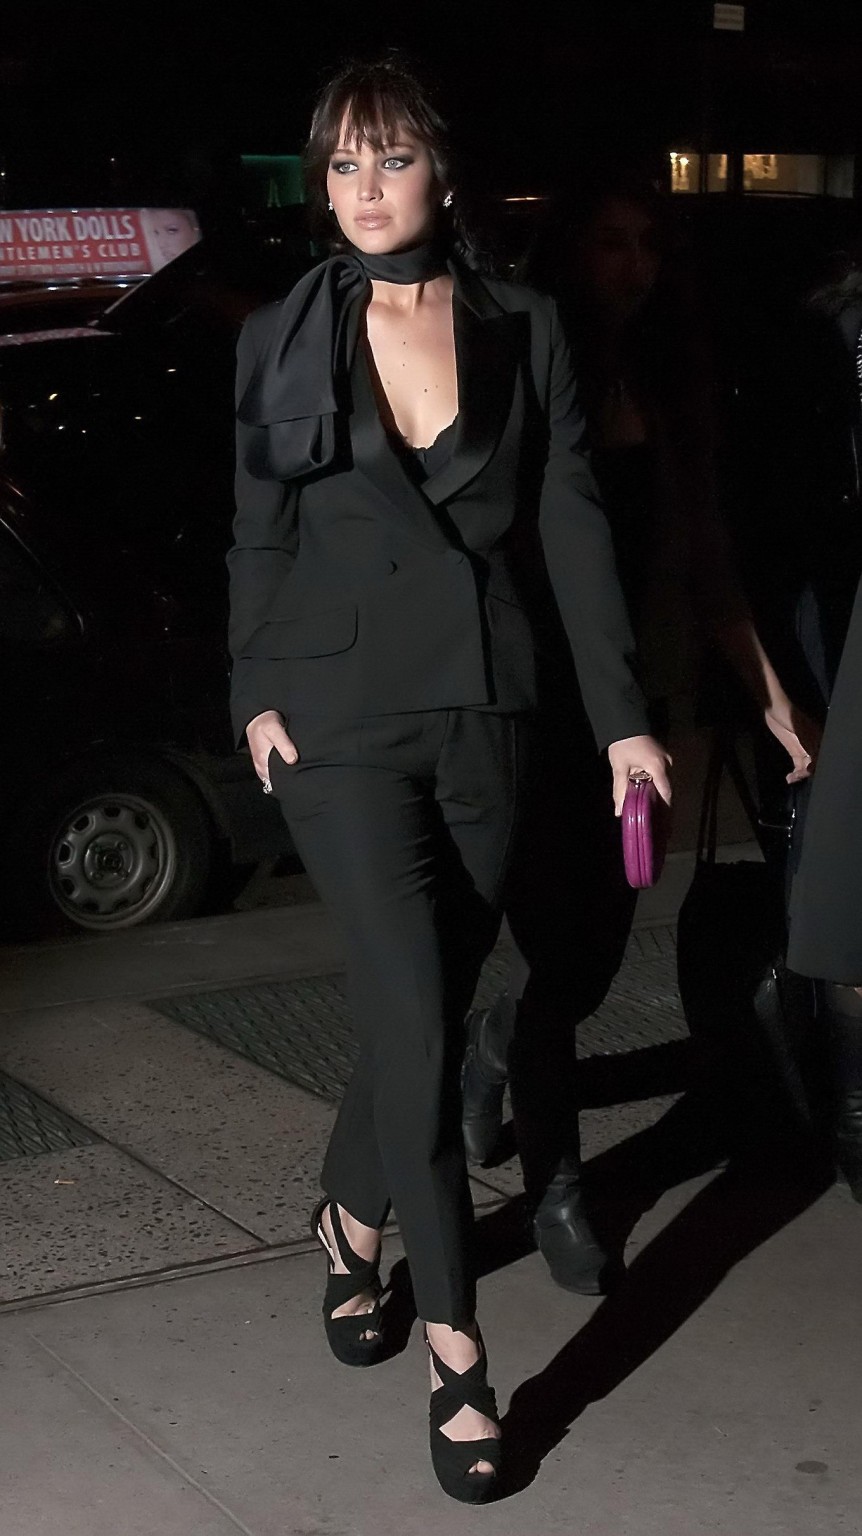 Jennifer Lawrence bra peak at 'The Silver Linings Playbook' premiere in NYC #75248492